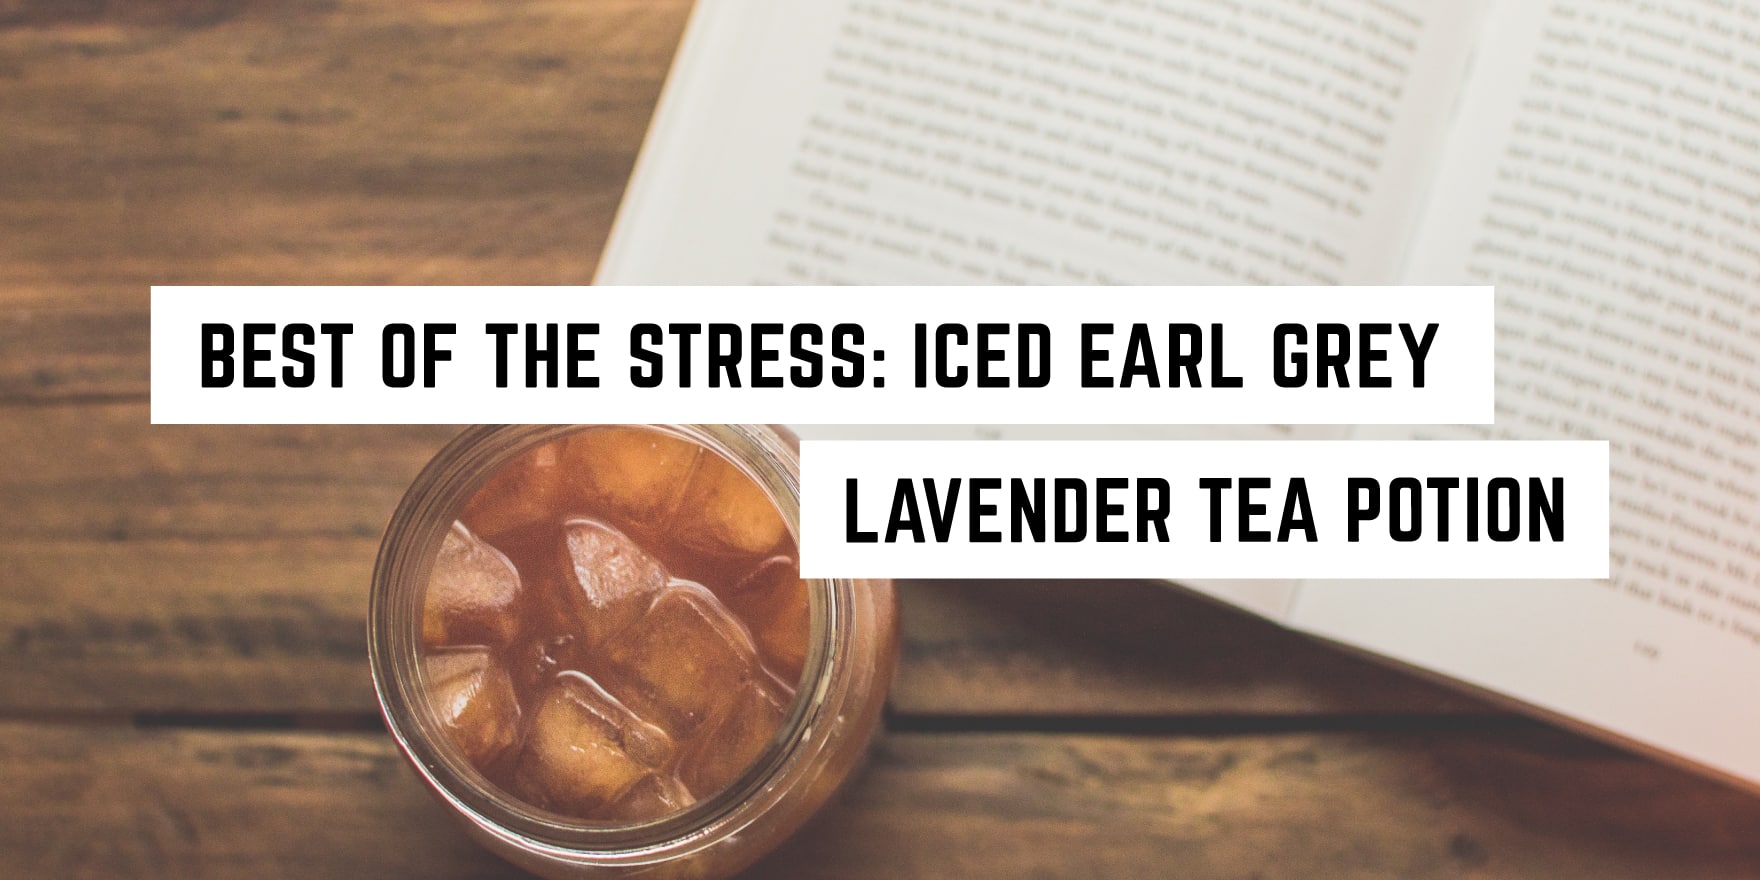 Best of the Stress: Iced Earl Grey Lavender Tea Potion Recipe